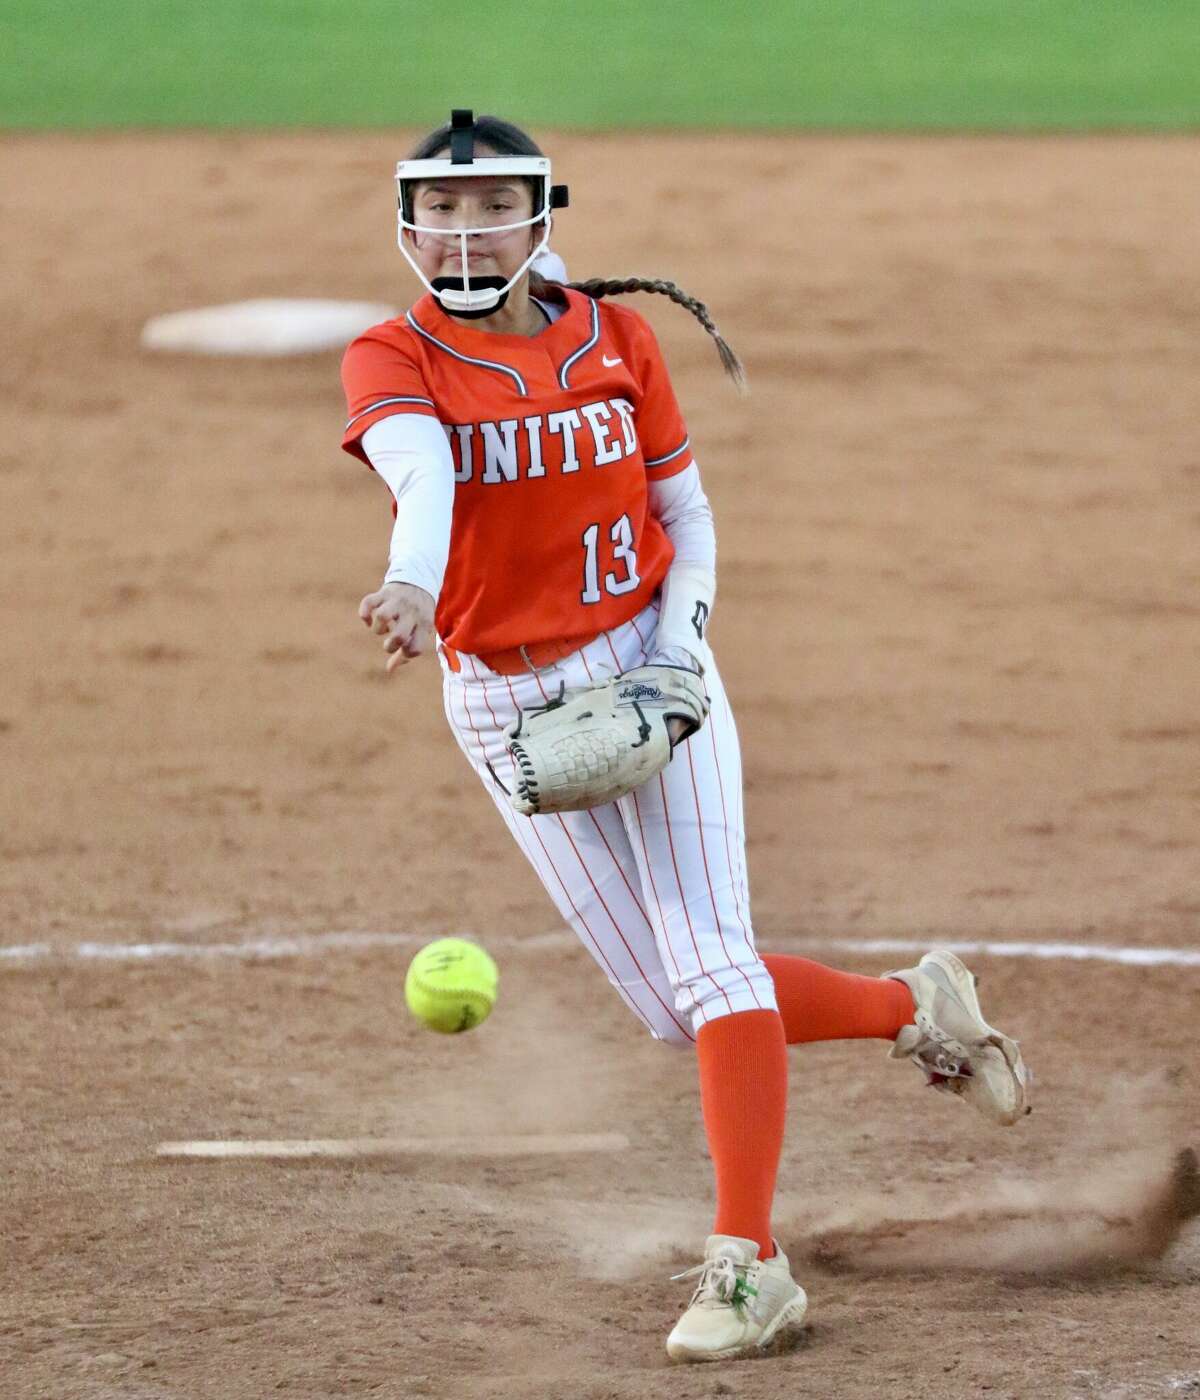 The United Lady Longhorns defeated the LBJ Lady Wolves in a key District 30-6A game on Wednesday.